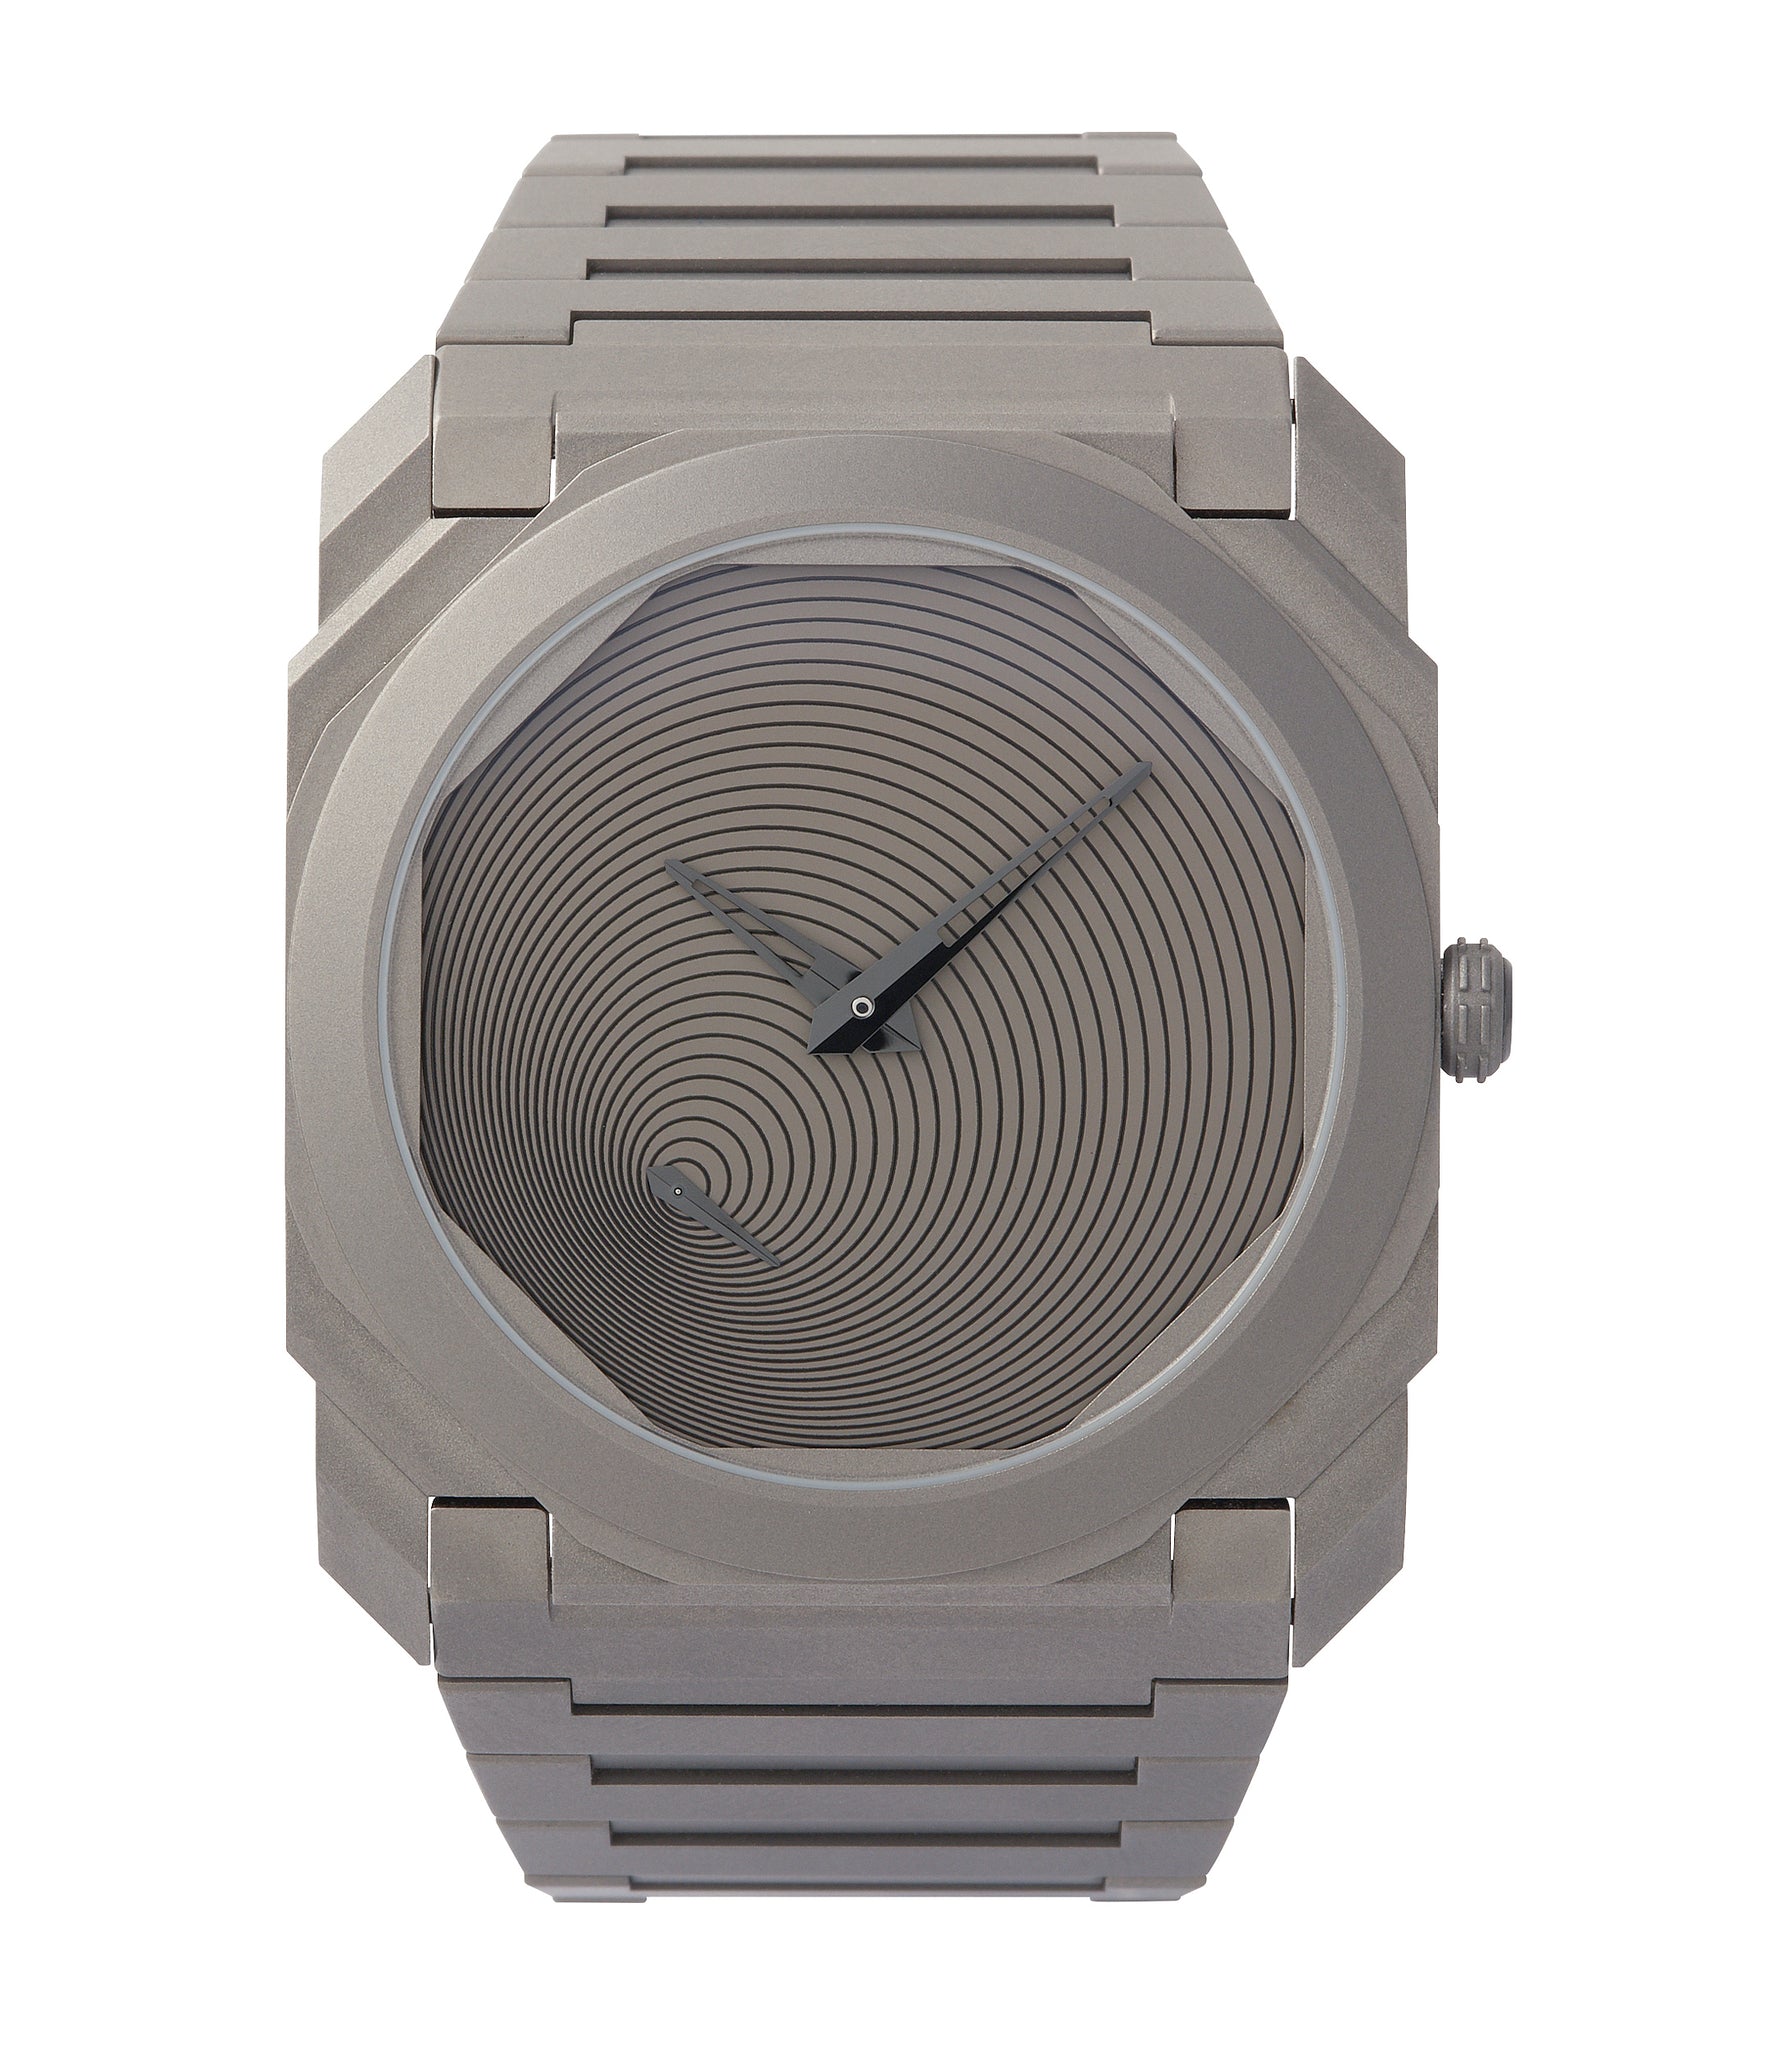 buy Bulgari BVULGARI Octa Finissimo Tadao Ando Limited Edition titanium sports watch for sale at A Collected Man London